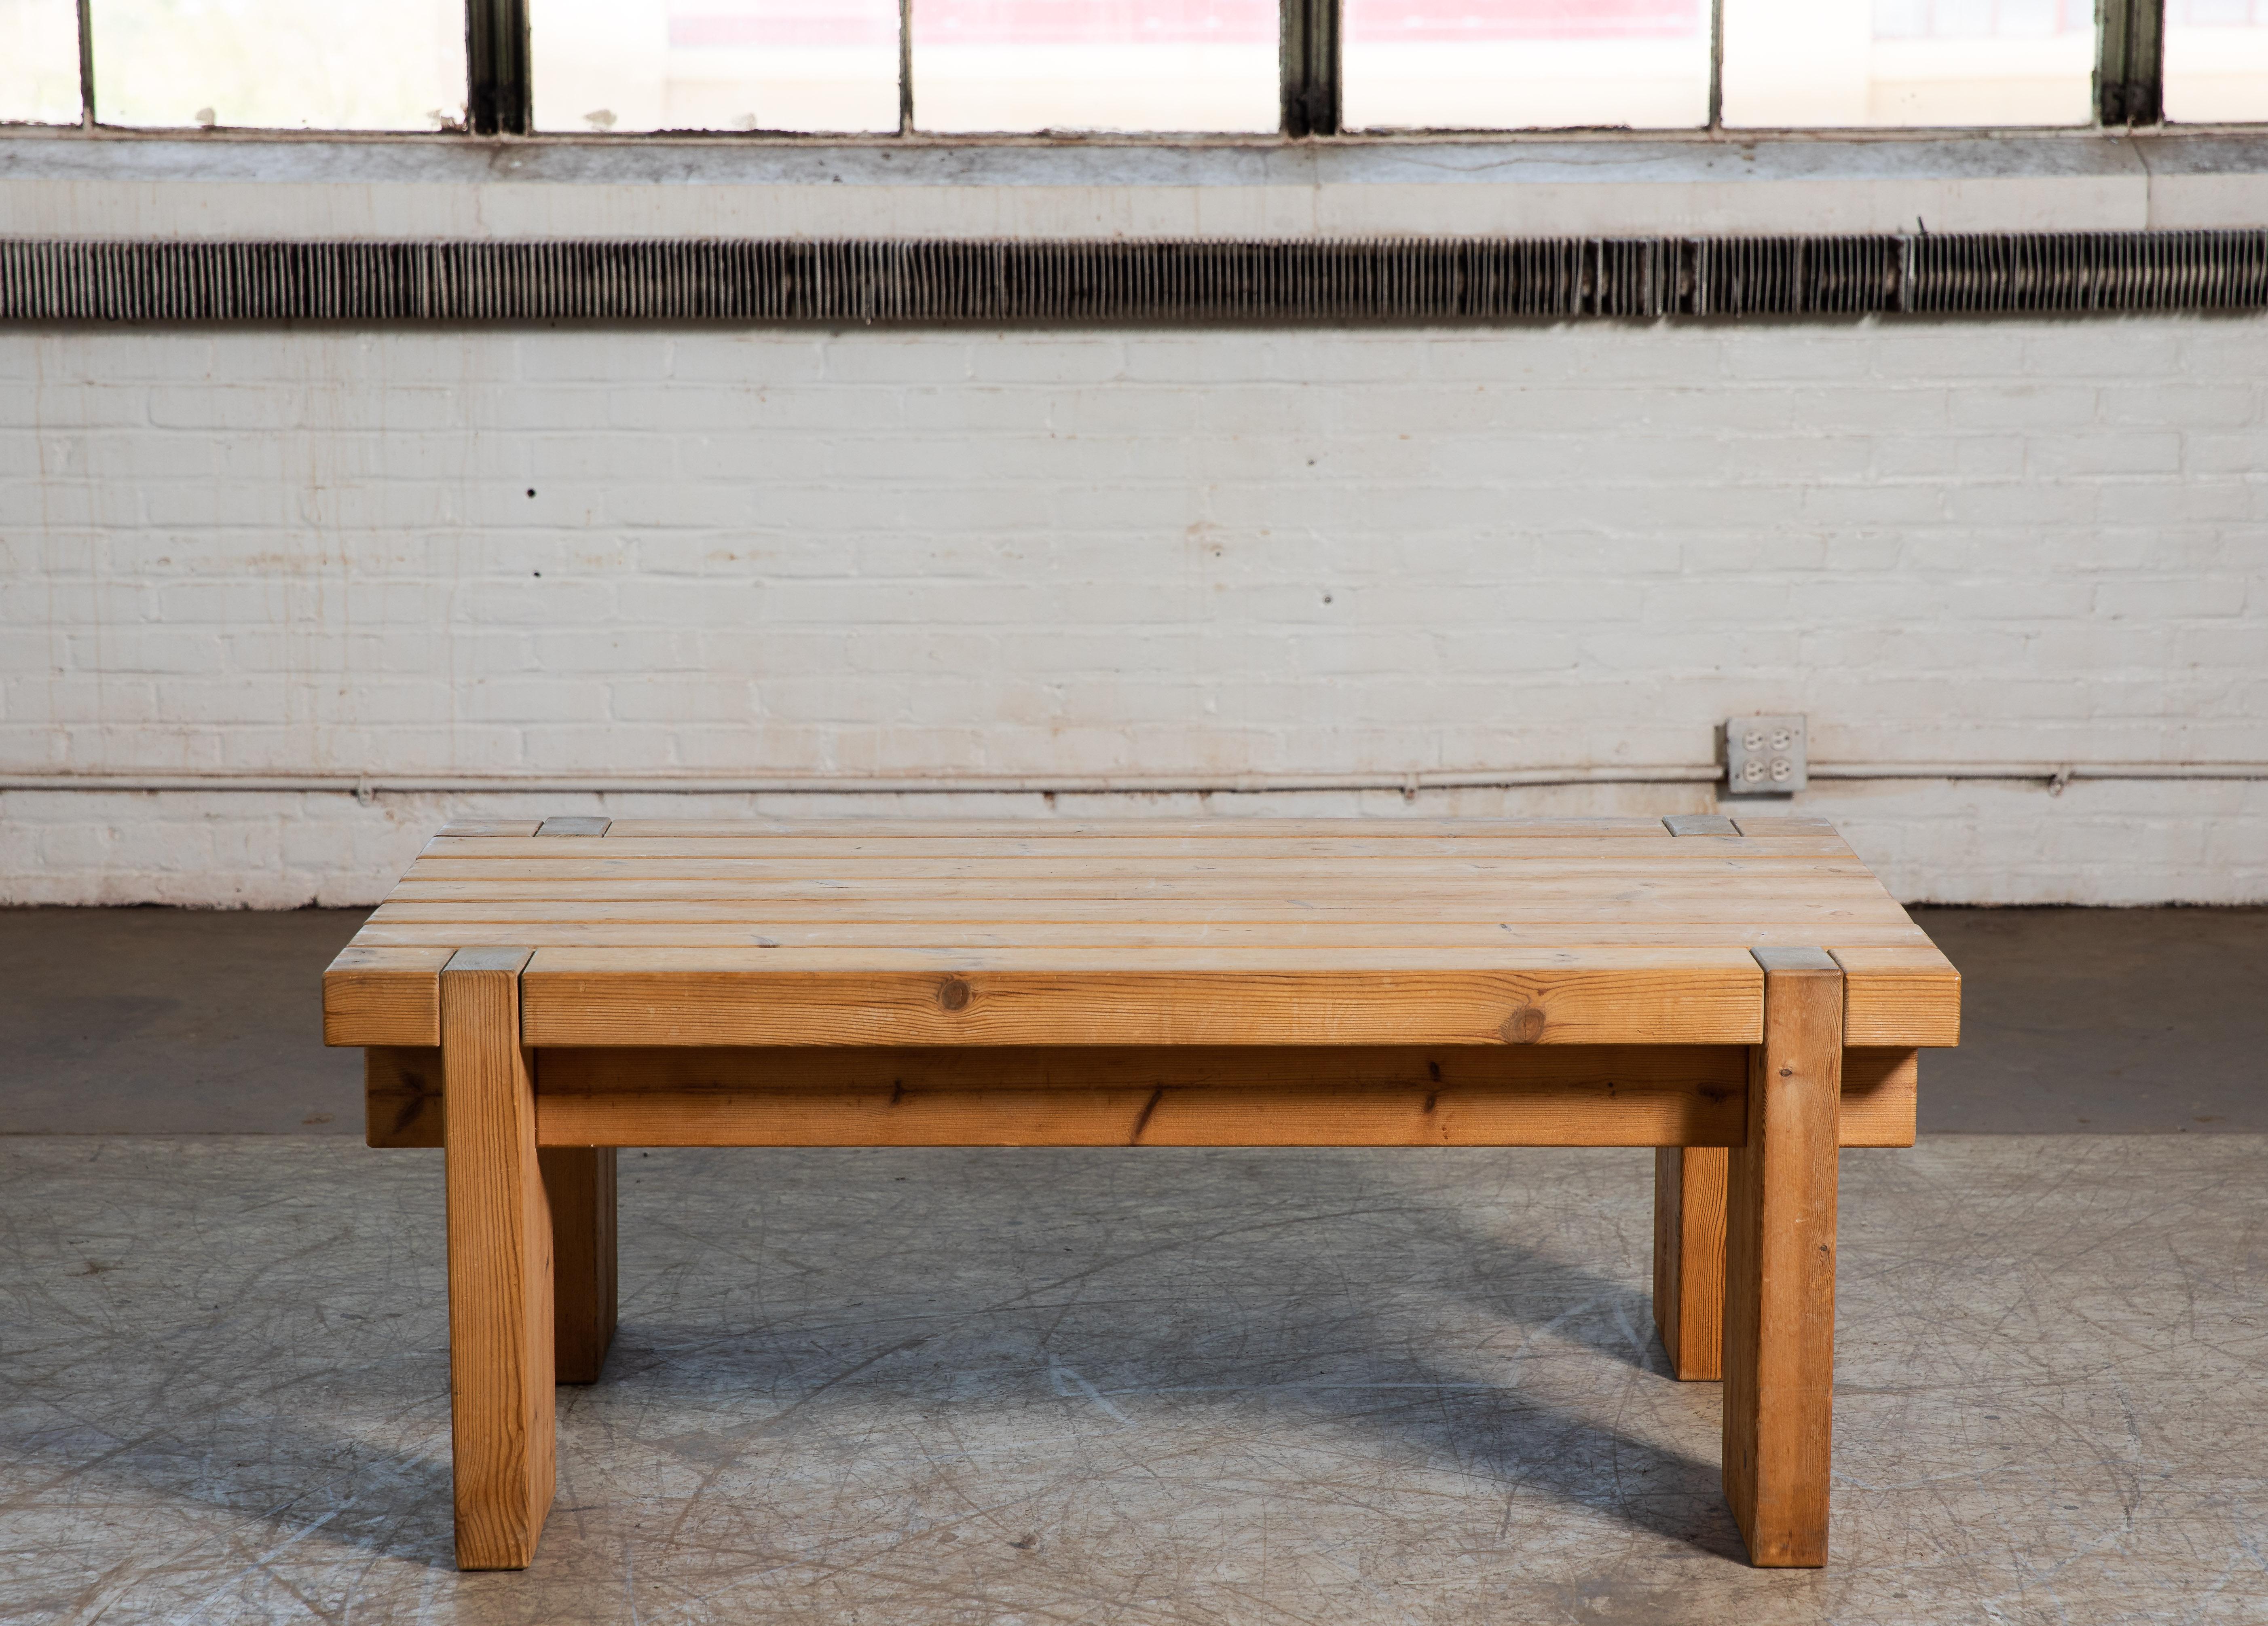 A great brutalist coffee table made from pommeranian pine with a nice patina. Perfect for the modern interior. A warm colour and patina that pair well with the minimalist scandinavian lifestyle. Unsigned but likely made by Jens Lyngsoe of Denmark